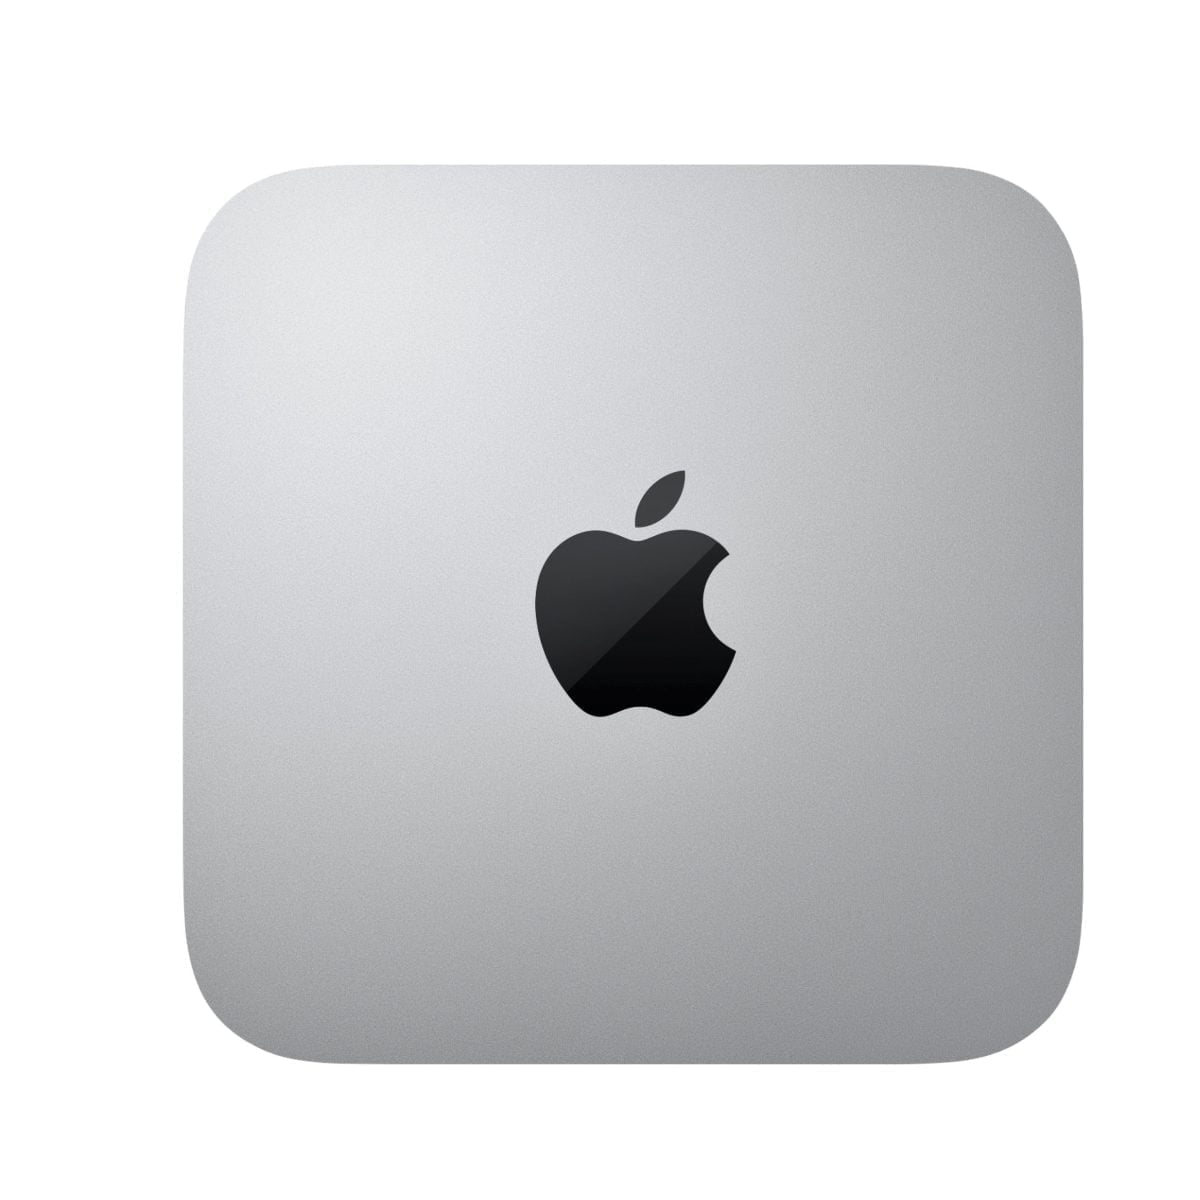 6427497Cv11D Scaled Apple &Lt;H1 Class=&Quot;Heading-5 V-Fw-Regular&Quot;&Gt;Mac Mini Desktop - Apple M1 Chip - 8Gb Memory - 512 Gb Ssd (Latest Model) - Silver&Lt;/H1&Gt; Https://Www.youtube.com/Watch?V=3Oq__Scnyna Mac Mini, The Most Versatile, Do-It-All Mac Desktop, To A Whole New Level Of Performance. With Up To 3X Faster Cpu Performance, Up To 6X Faster Graphics, A Powerful Neural Engine With Up To 15X Faster Machine Learning, And Superfast Unified Memory — All In An Ultracompact Design.so You Can Create, Work, And Play On Mac Mini With Speed And Power Beyond Anything You Ever Imagined. Mac Mini Mac Mini Desktop - Apple M1 Chip - 8Gb Memory - 512 Gb Ssd - Mgnt3